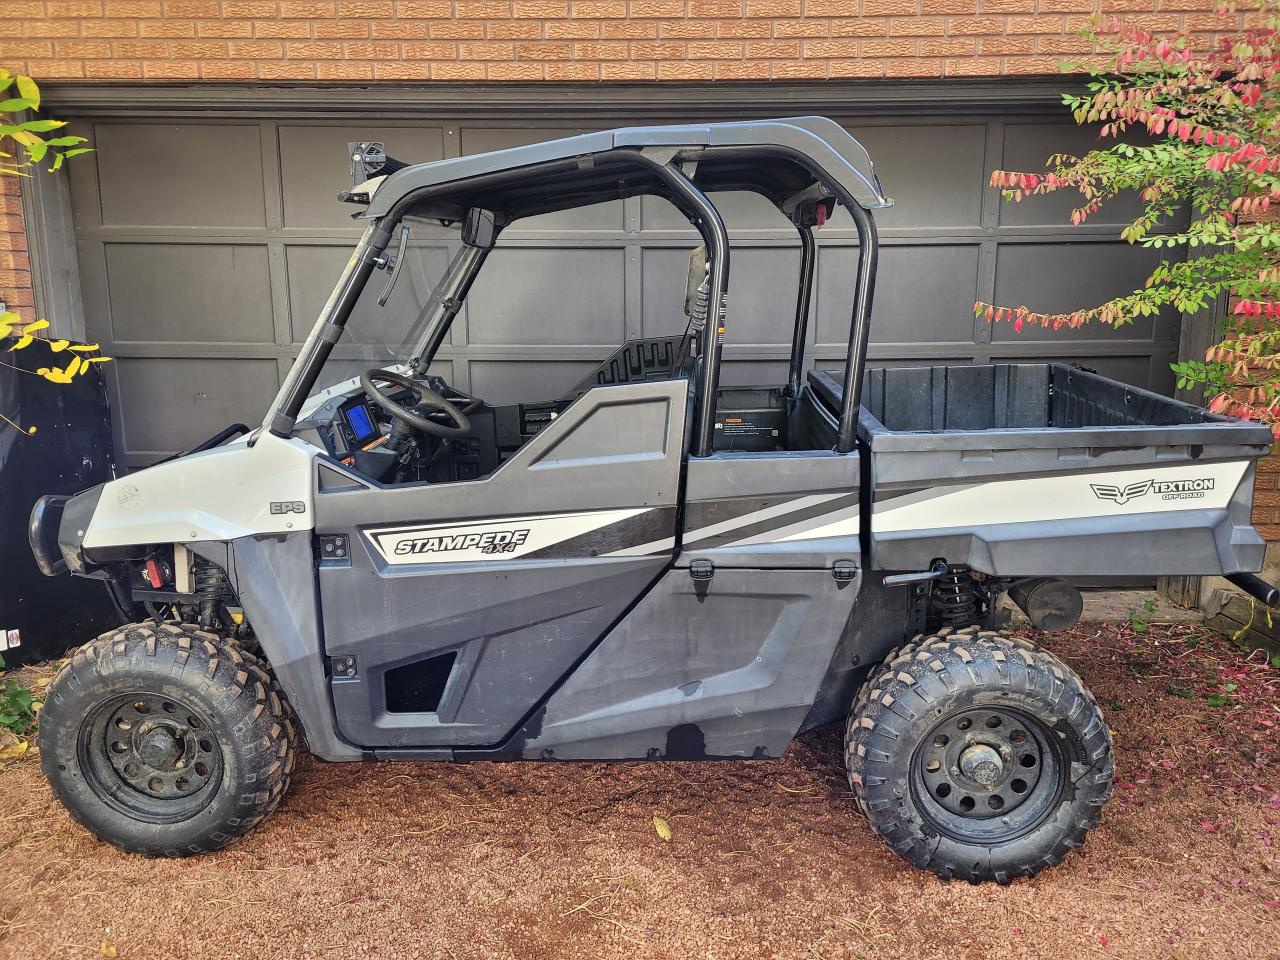 2017 Textron Stampede 900 EPS EPS XP LE 4x4 Financing Available, Trades Welcome! - Photo #1